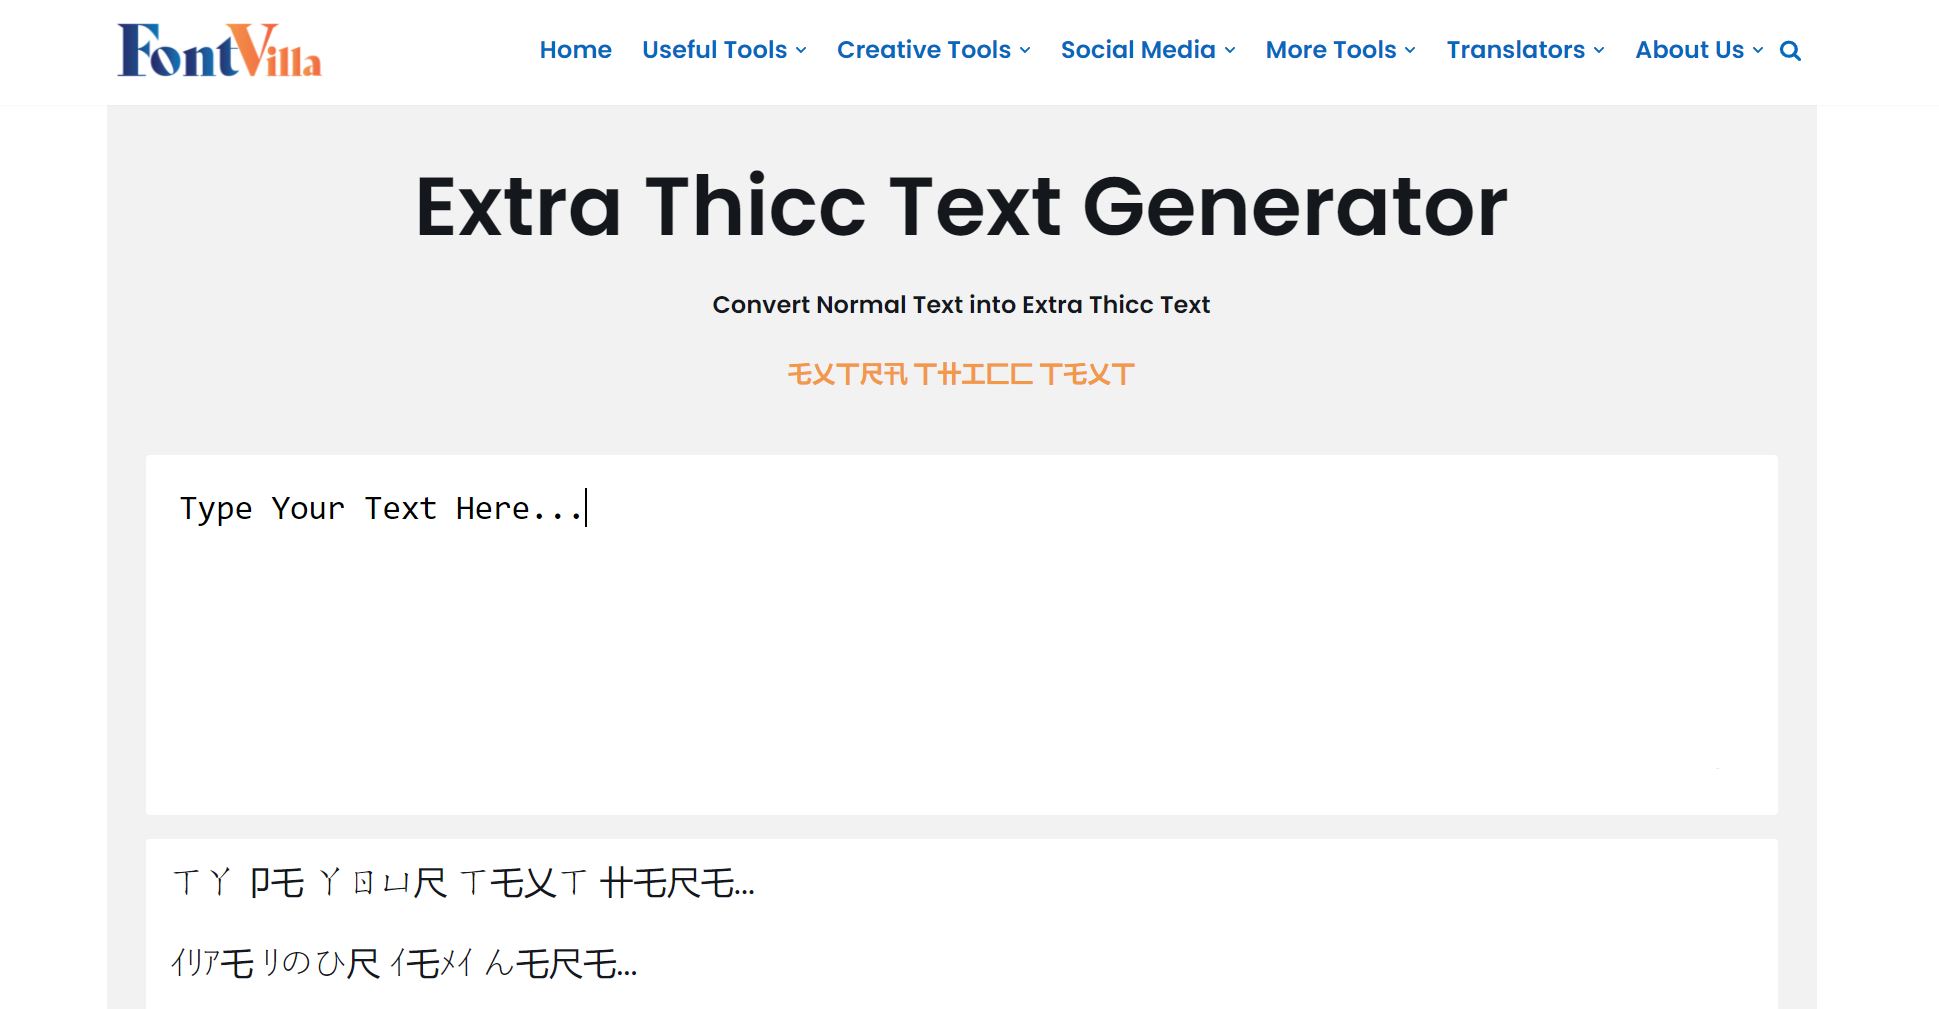 Extra Thicc Text Generator